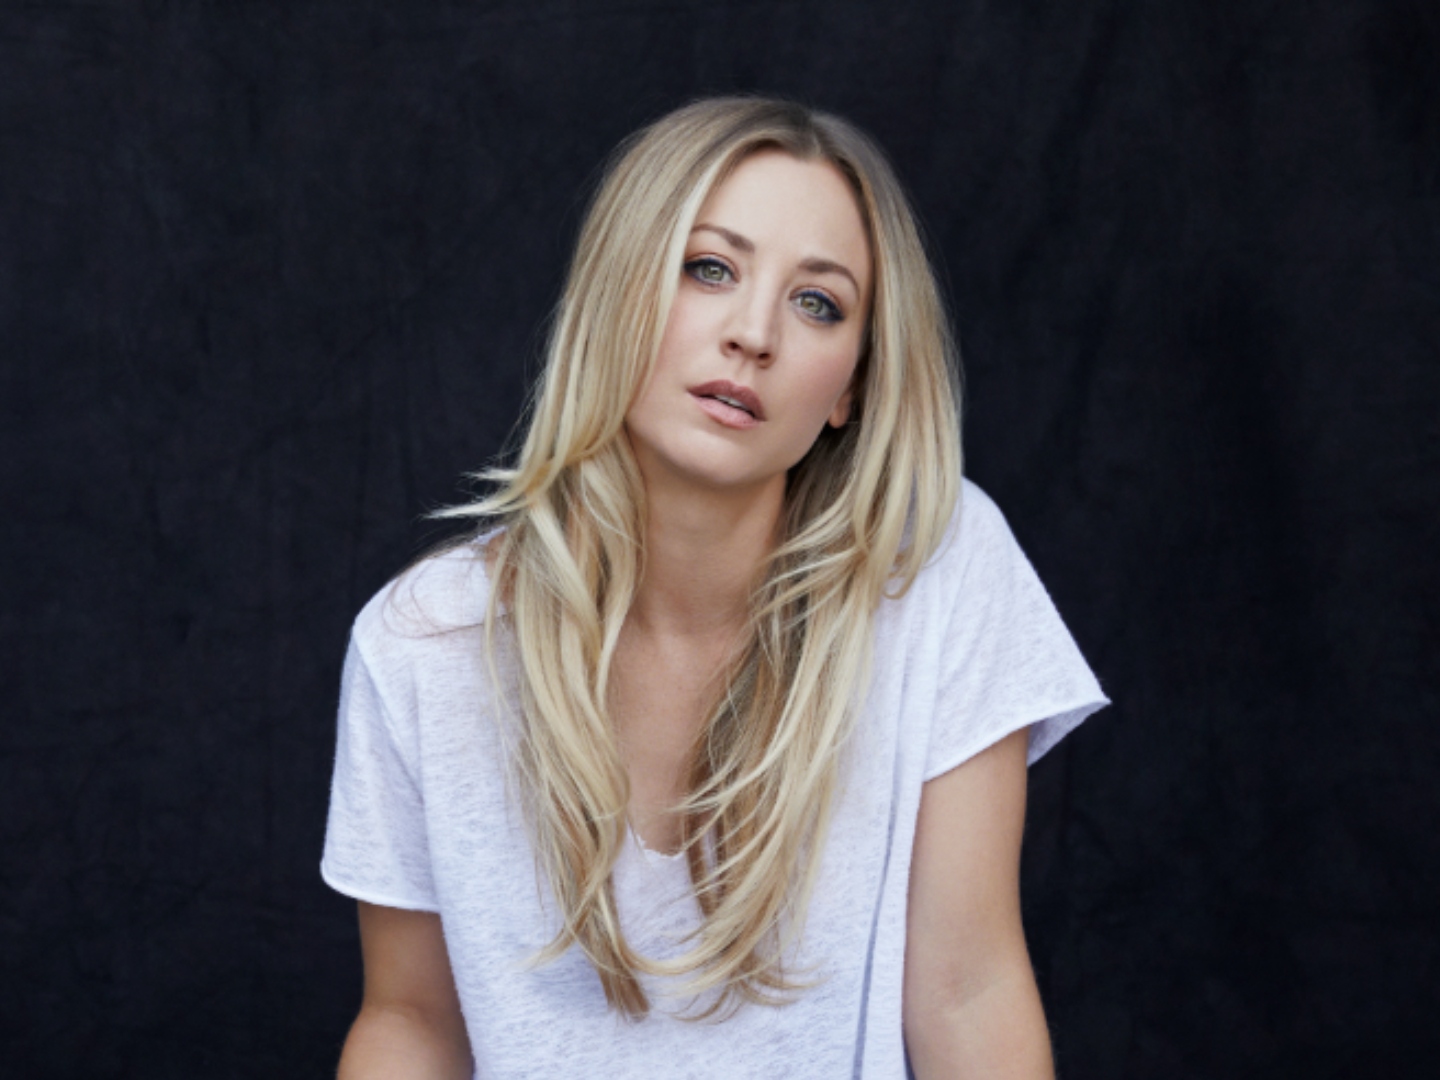 Kaley Cuoco splits up from husband Karl Cook after three years, spends birthday by herself